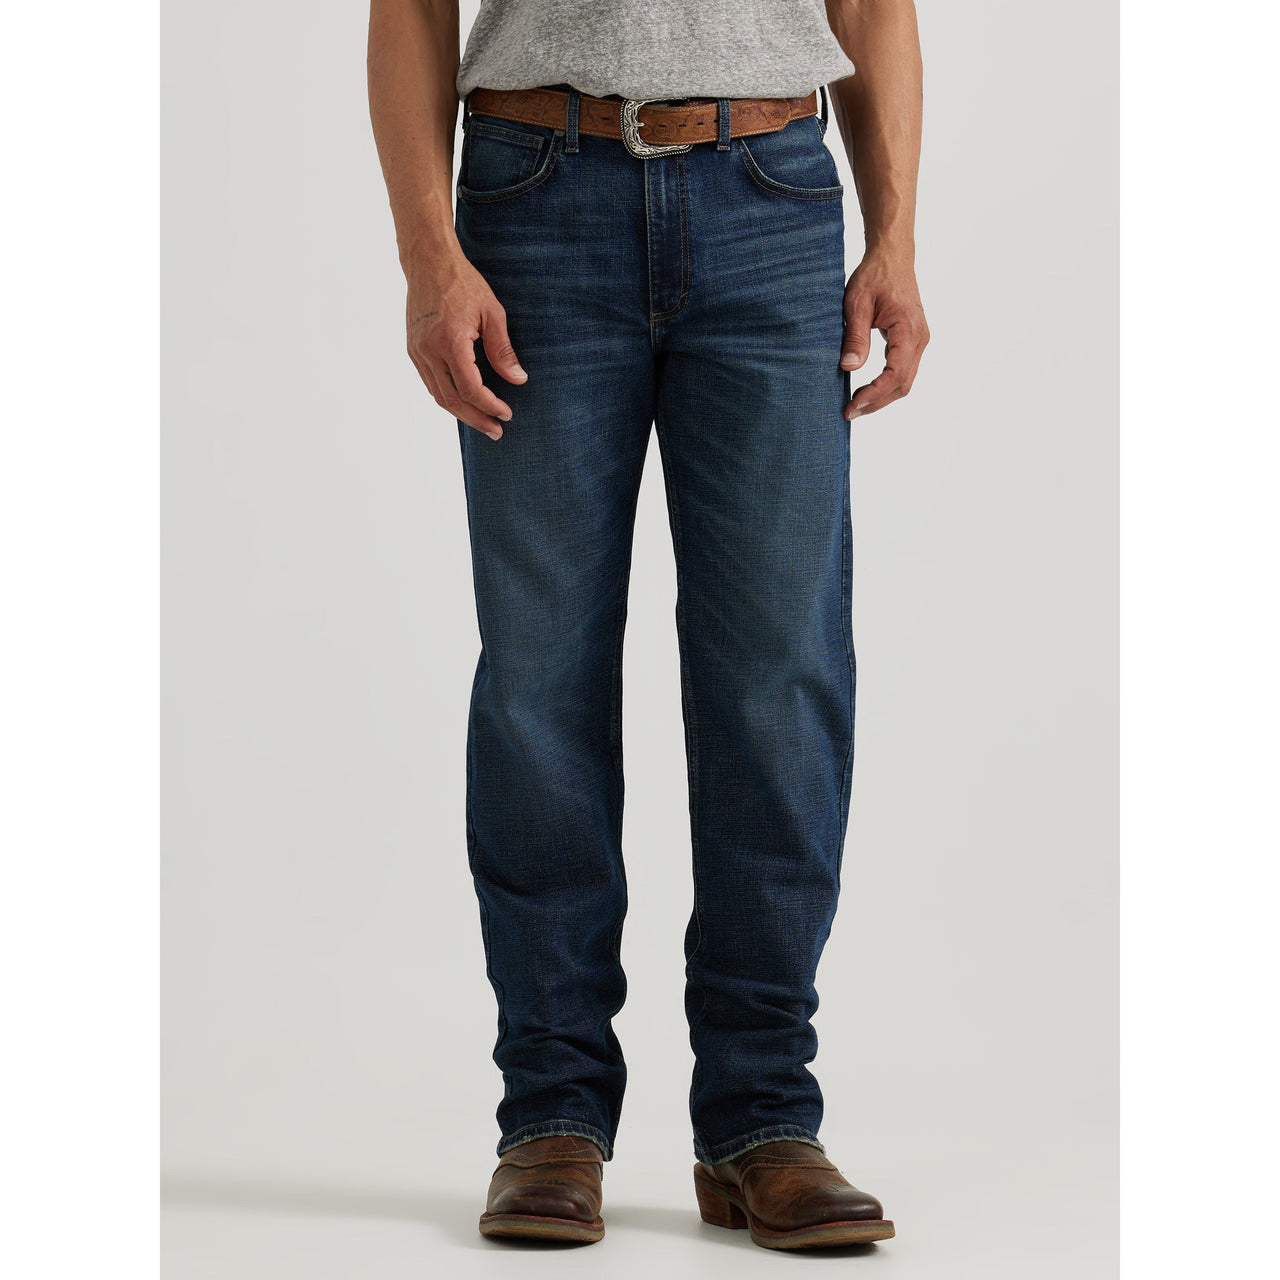 Wrangler Men's 20X Extreme Relaxed Jeans - Sunnybrook